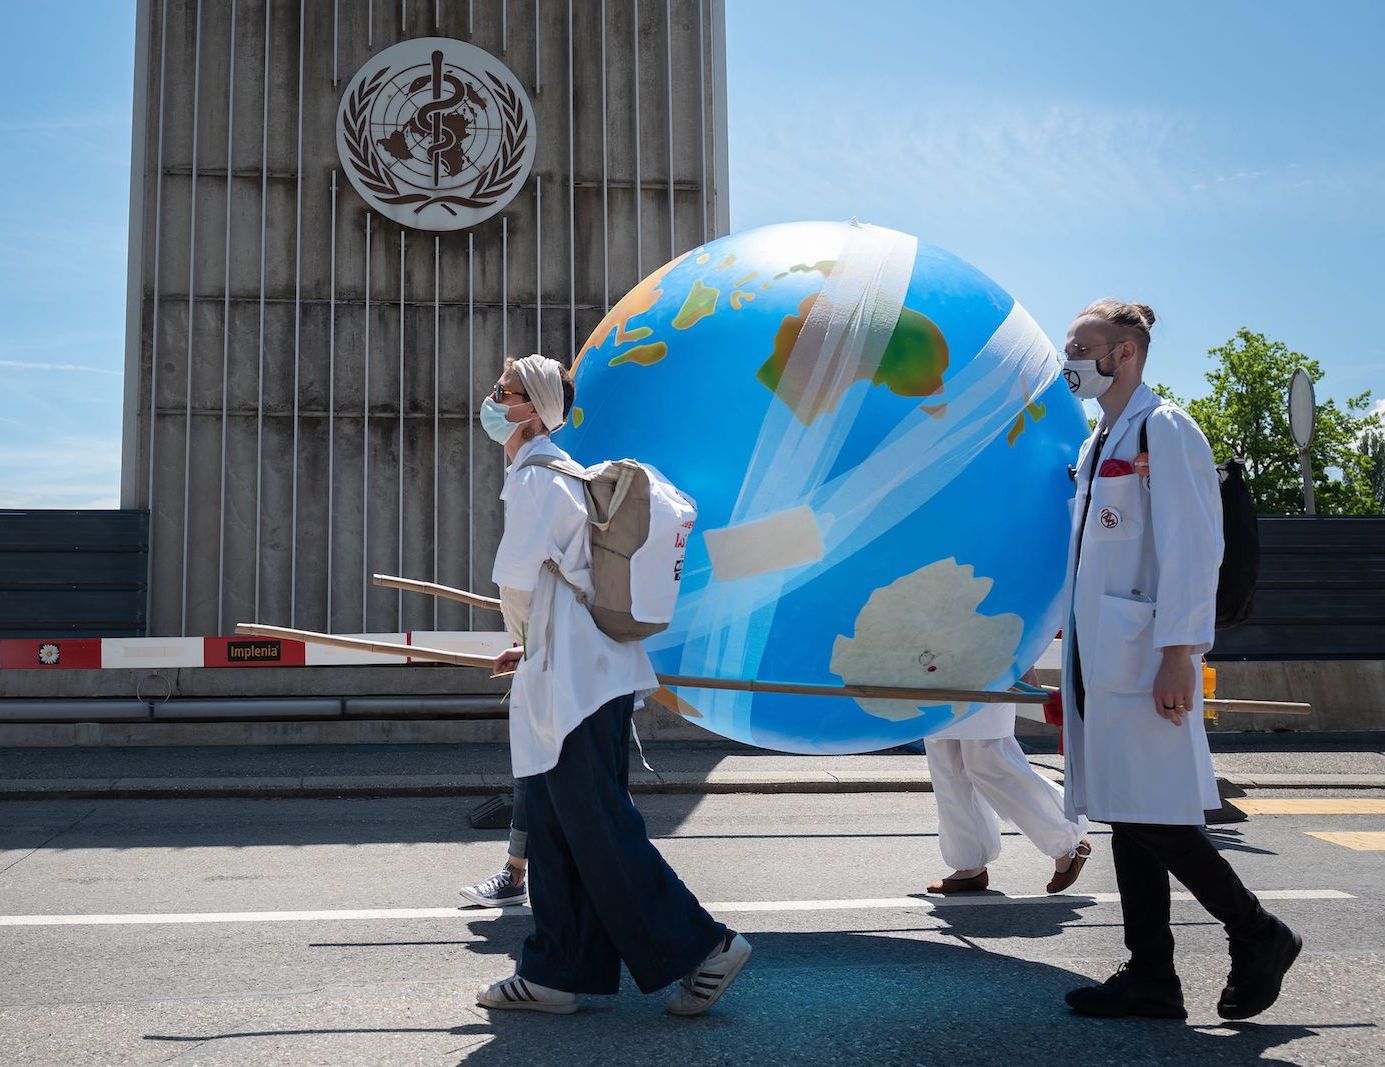 two people in white medical coats carry a blow up globe covered in bandages as they walk in front of a building with a medical logo